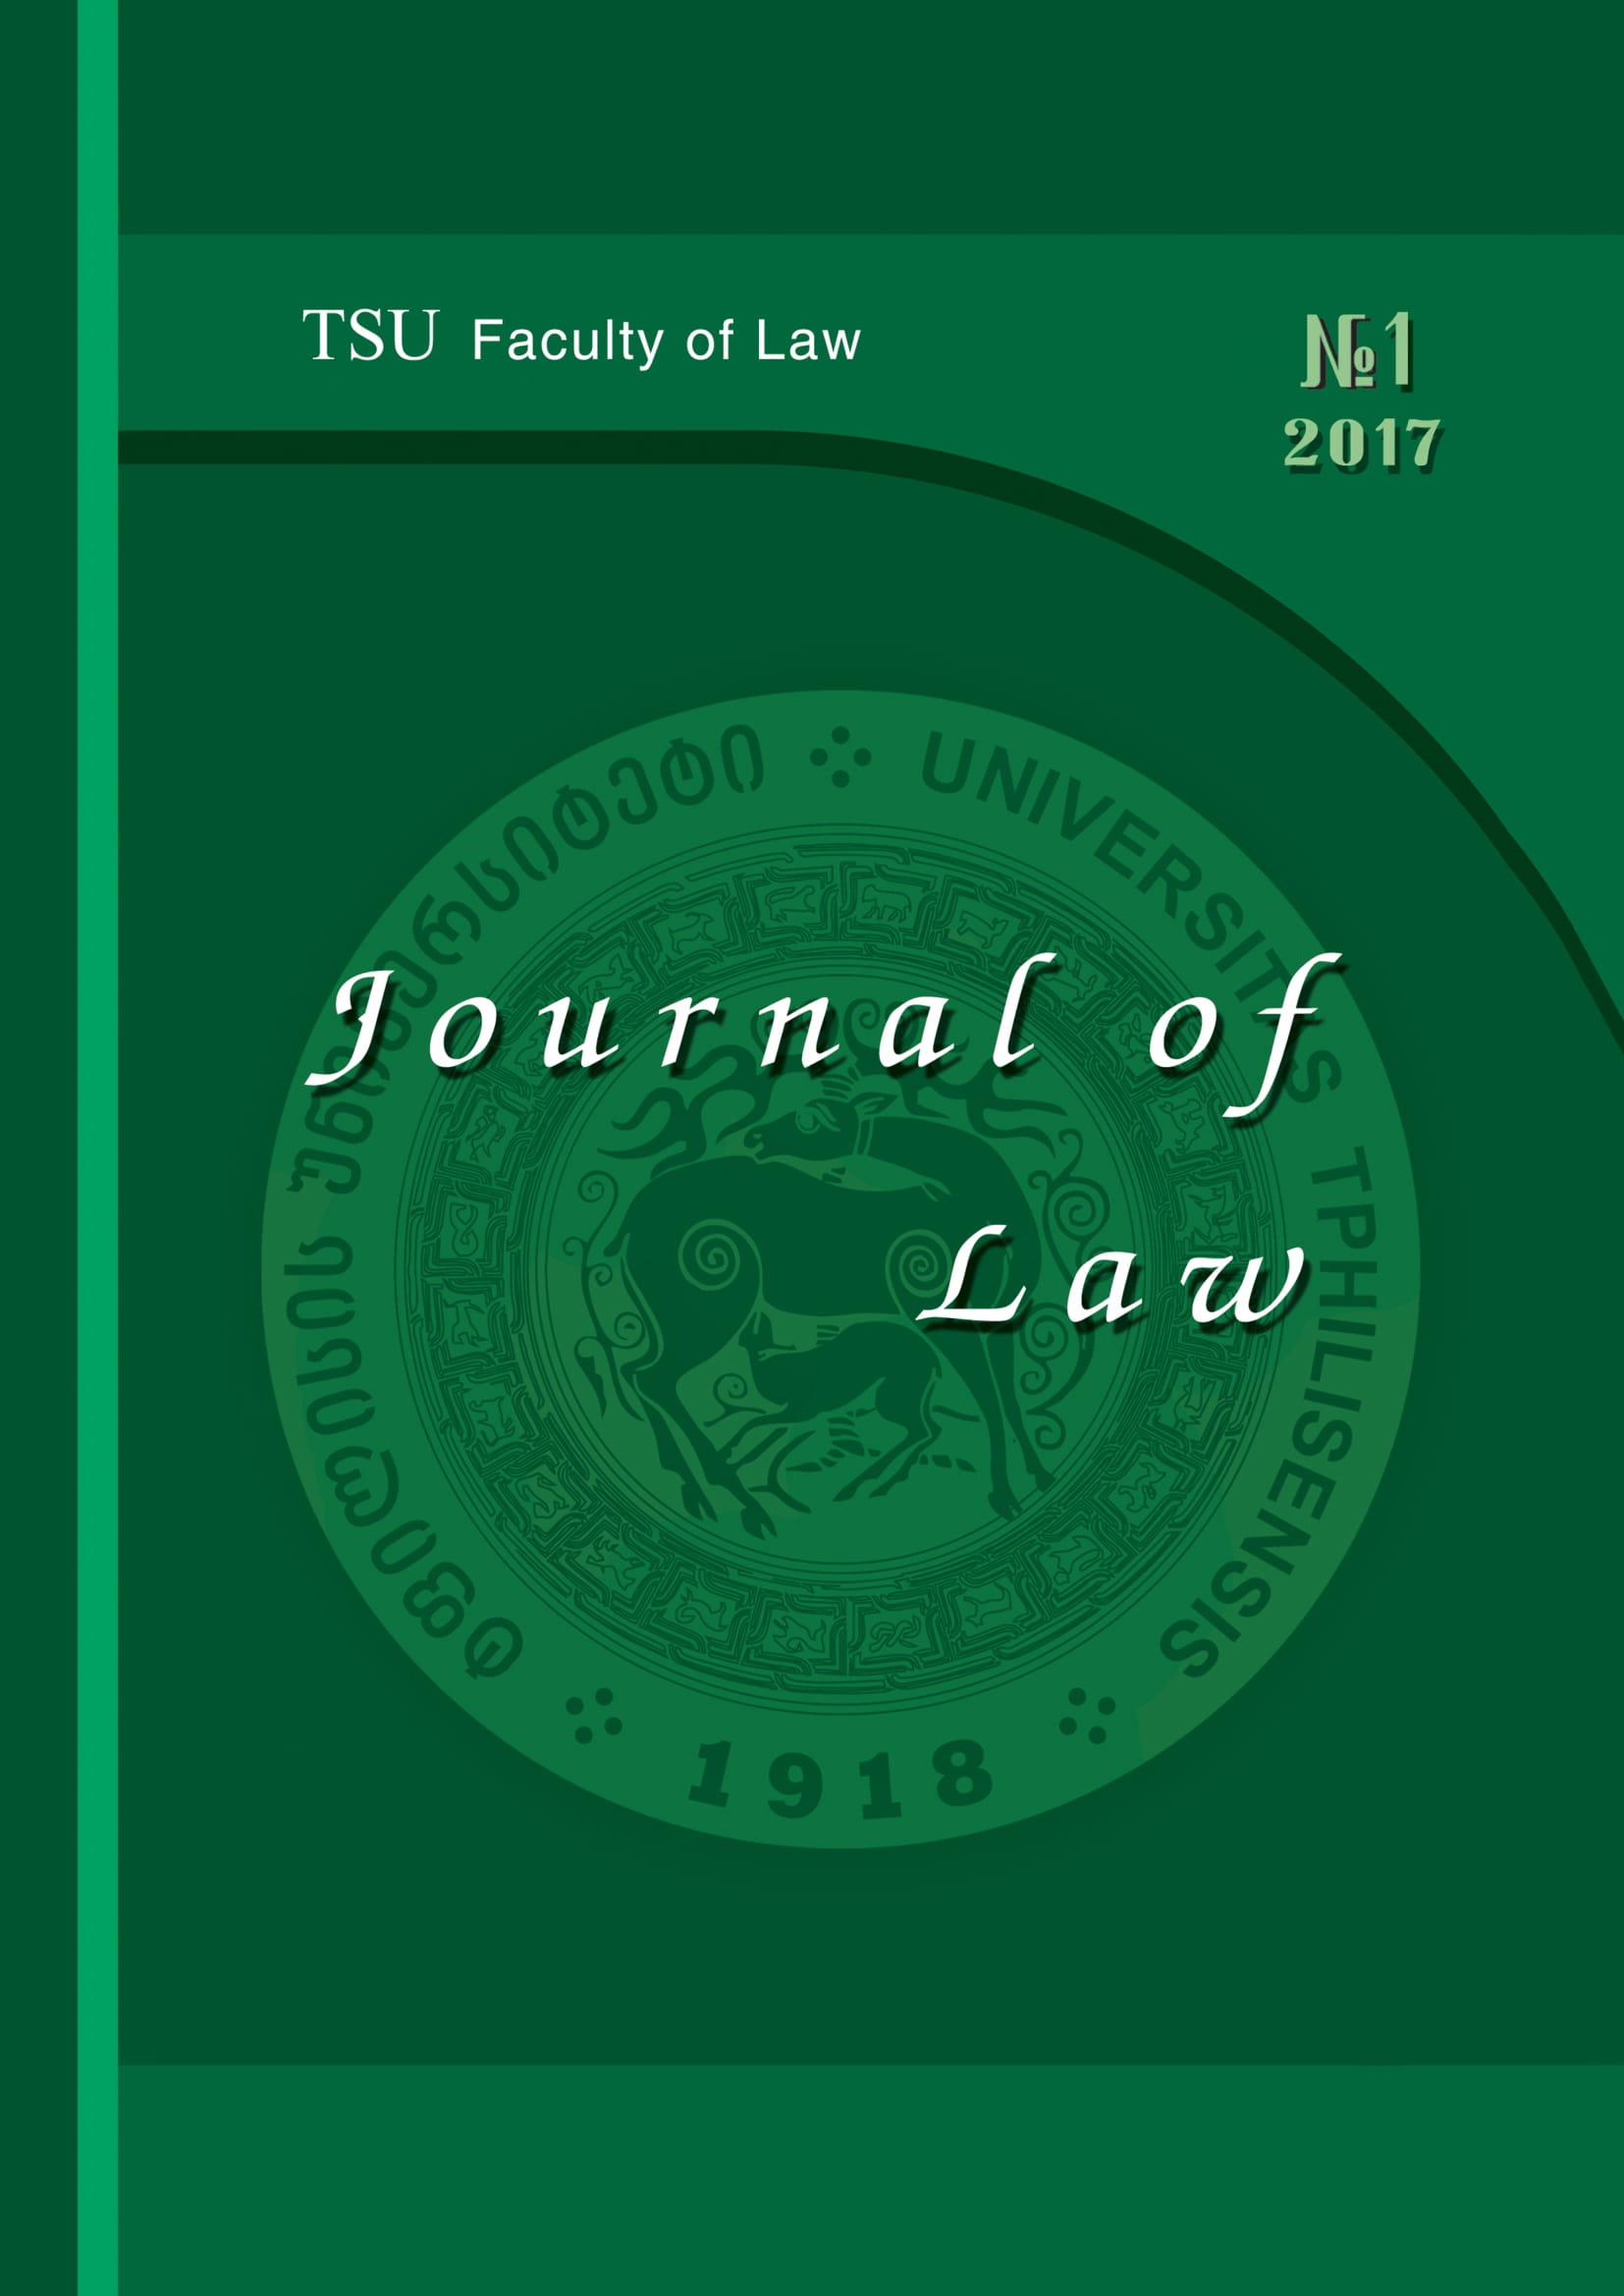 					View No. 1 (2017): Journal of Law
				